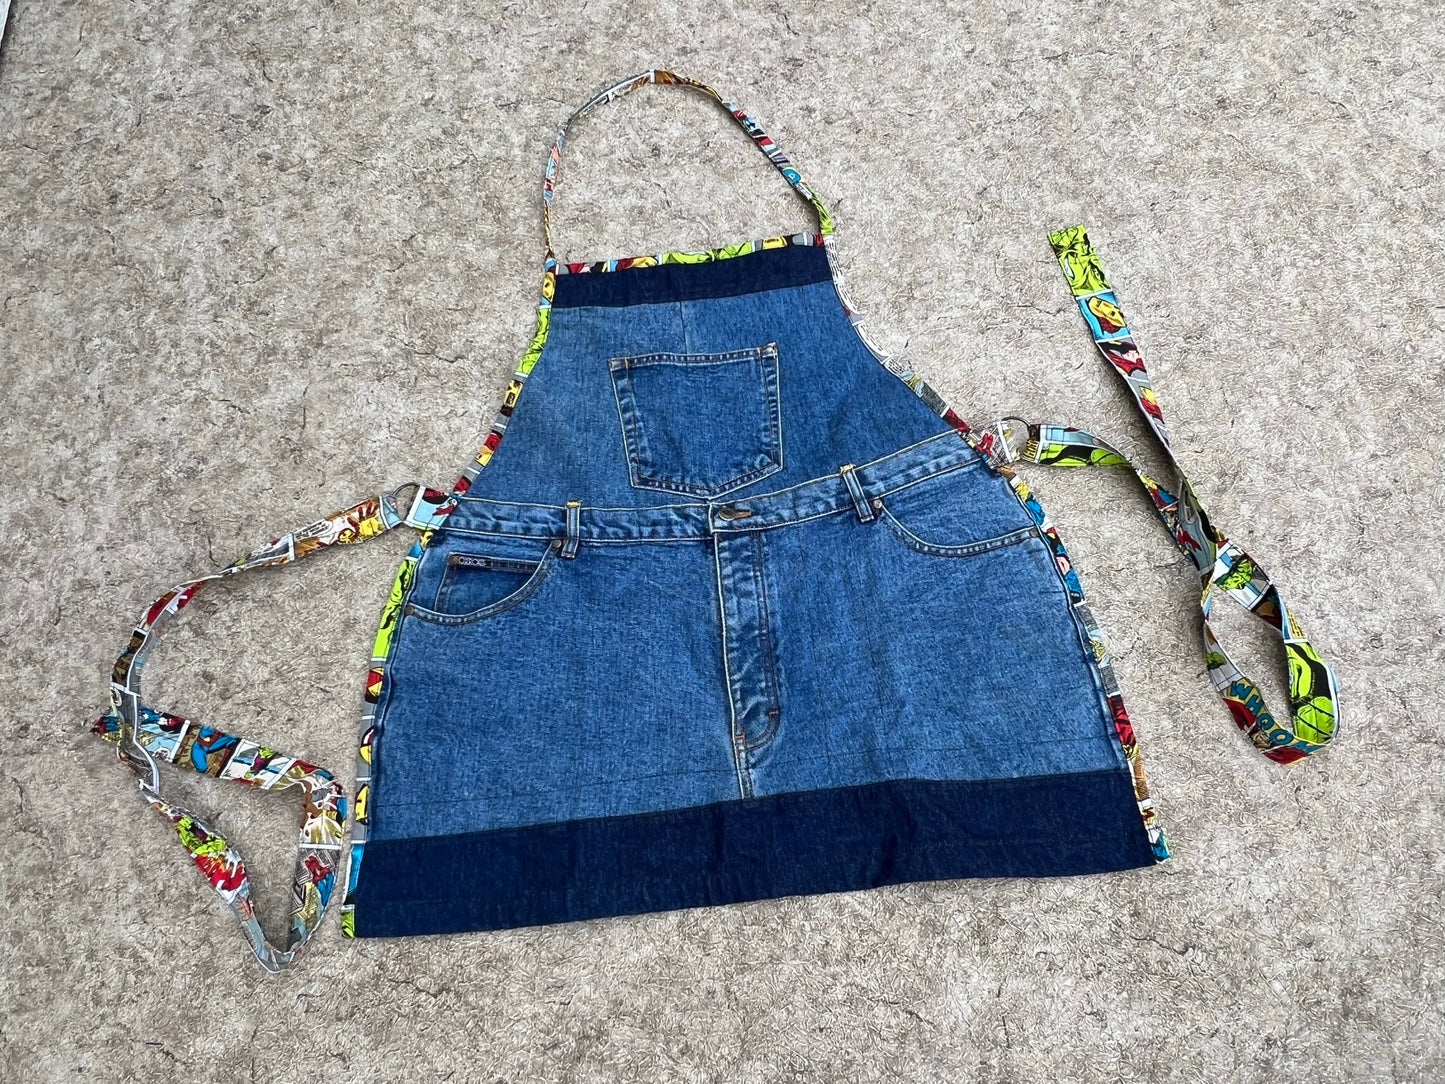 Marvel Comics Action Figures Cartoon Custom Apron Adult Size Made With Denim Jeans and Cotton Comic Material Can Be Used Either Side Amazing